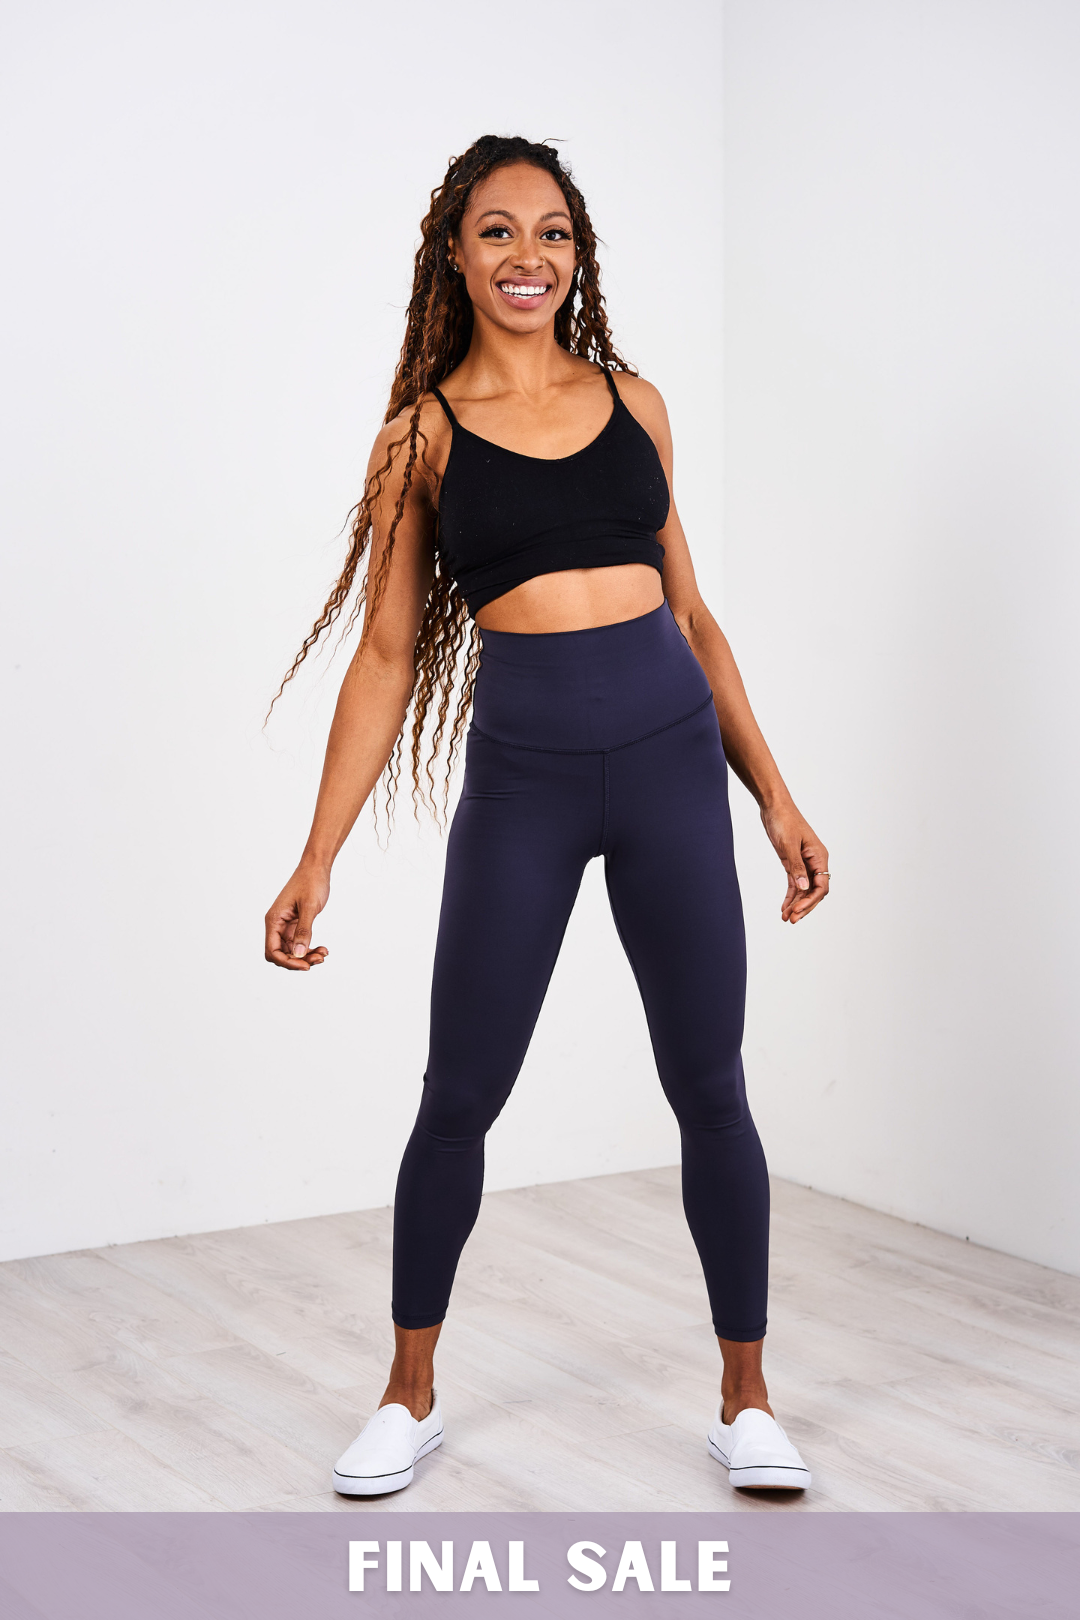 High-rise stretch-jersey leggings in black - Vince